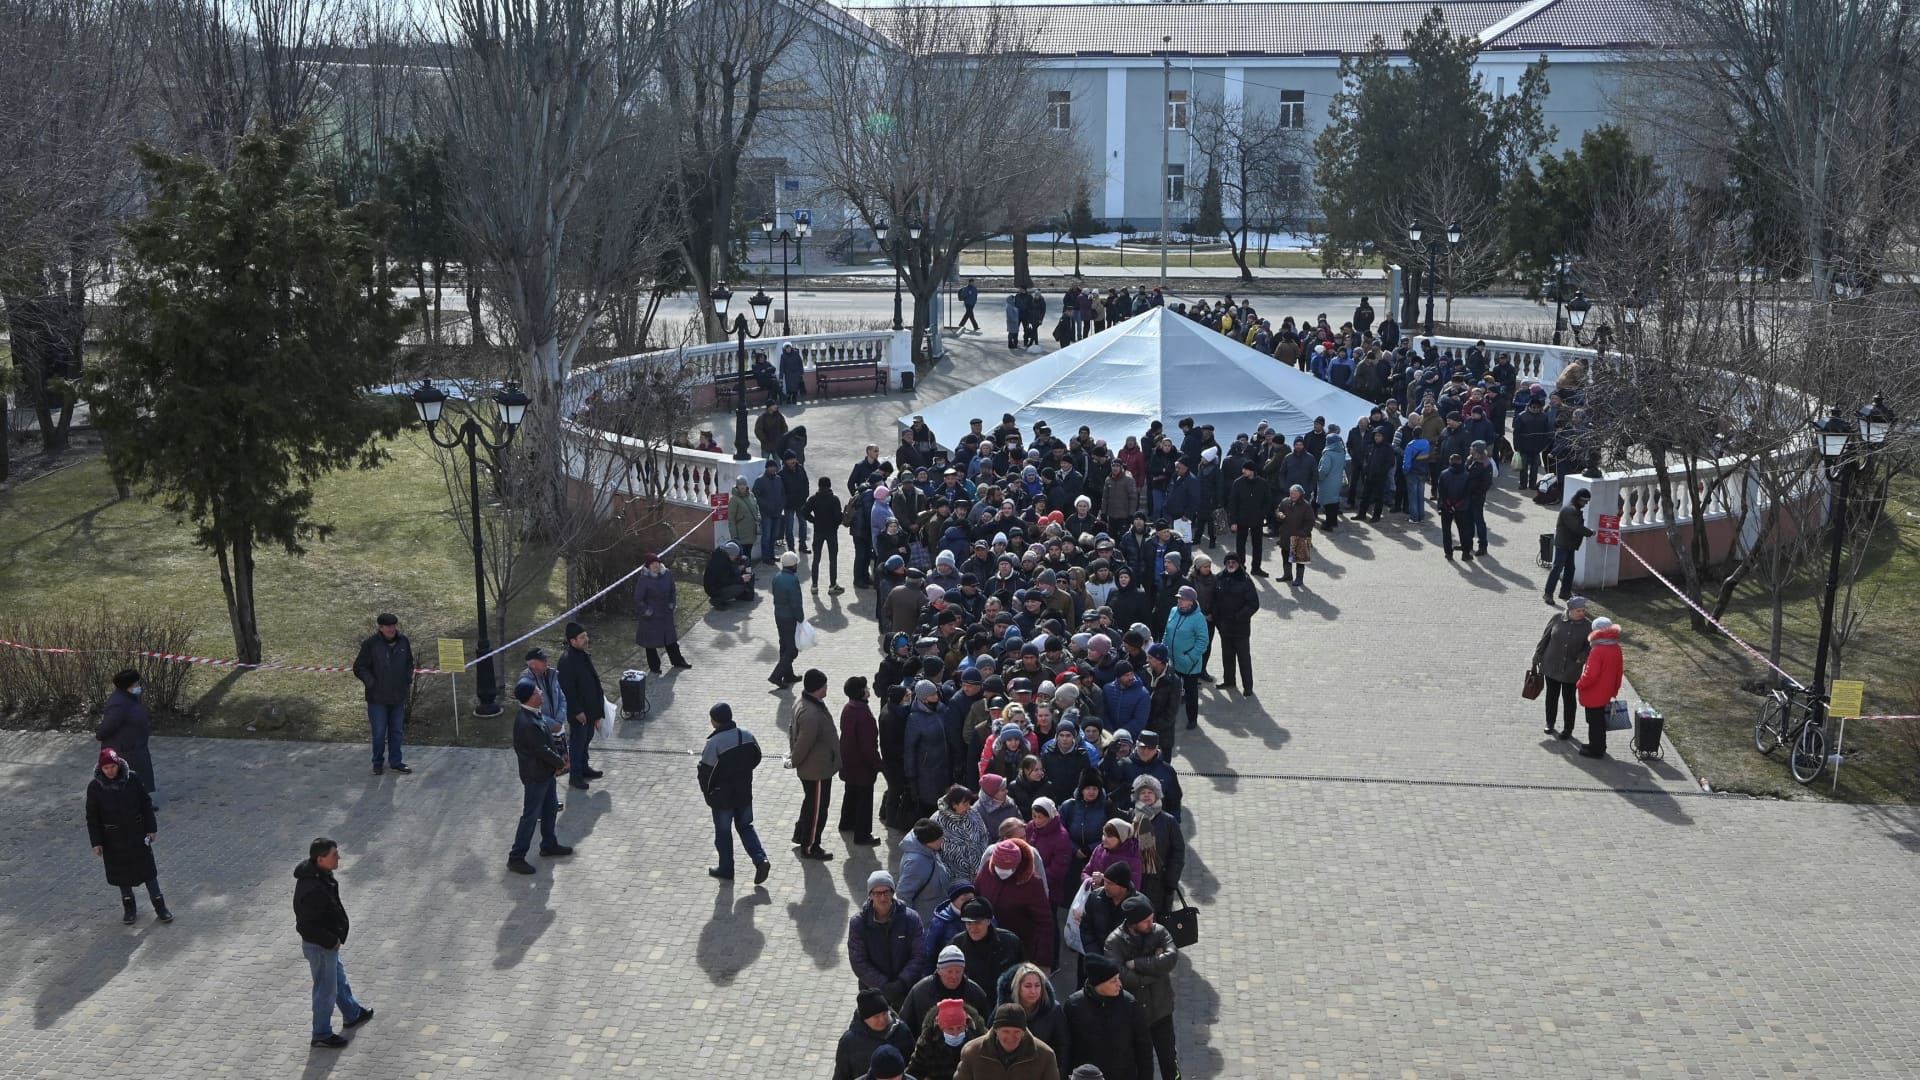 People wait in queue to take free food as part of humanitarian aid, amid Russia's invasion of Ukraine, outside the Drama Theatre, in Sievierodonetsk, Luhansk region, Ukraine March 23, 2022.